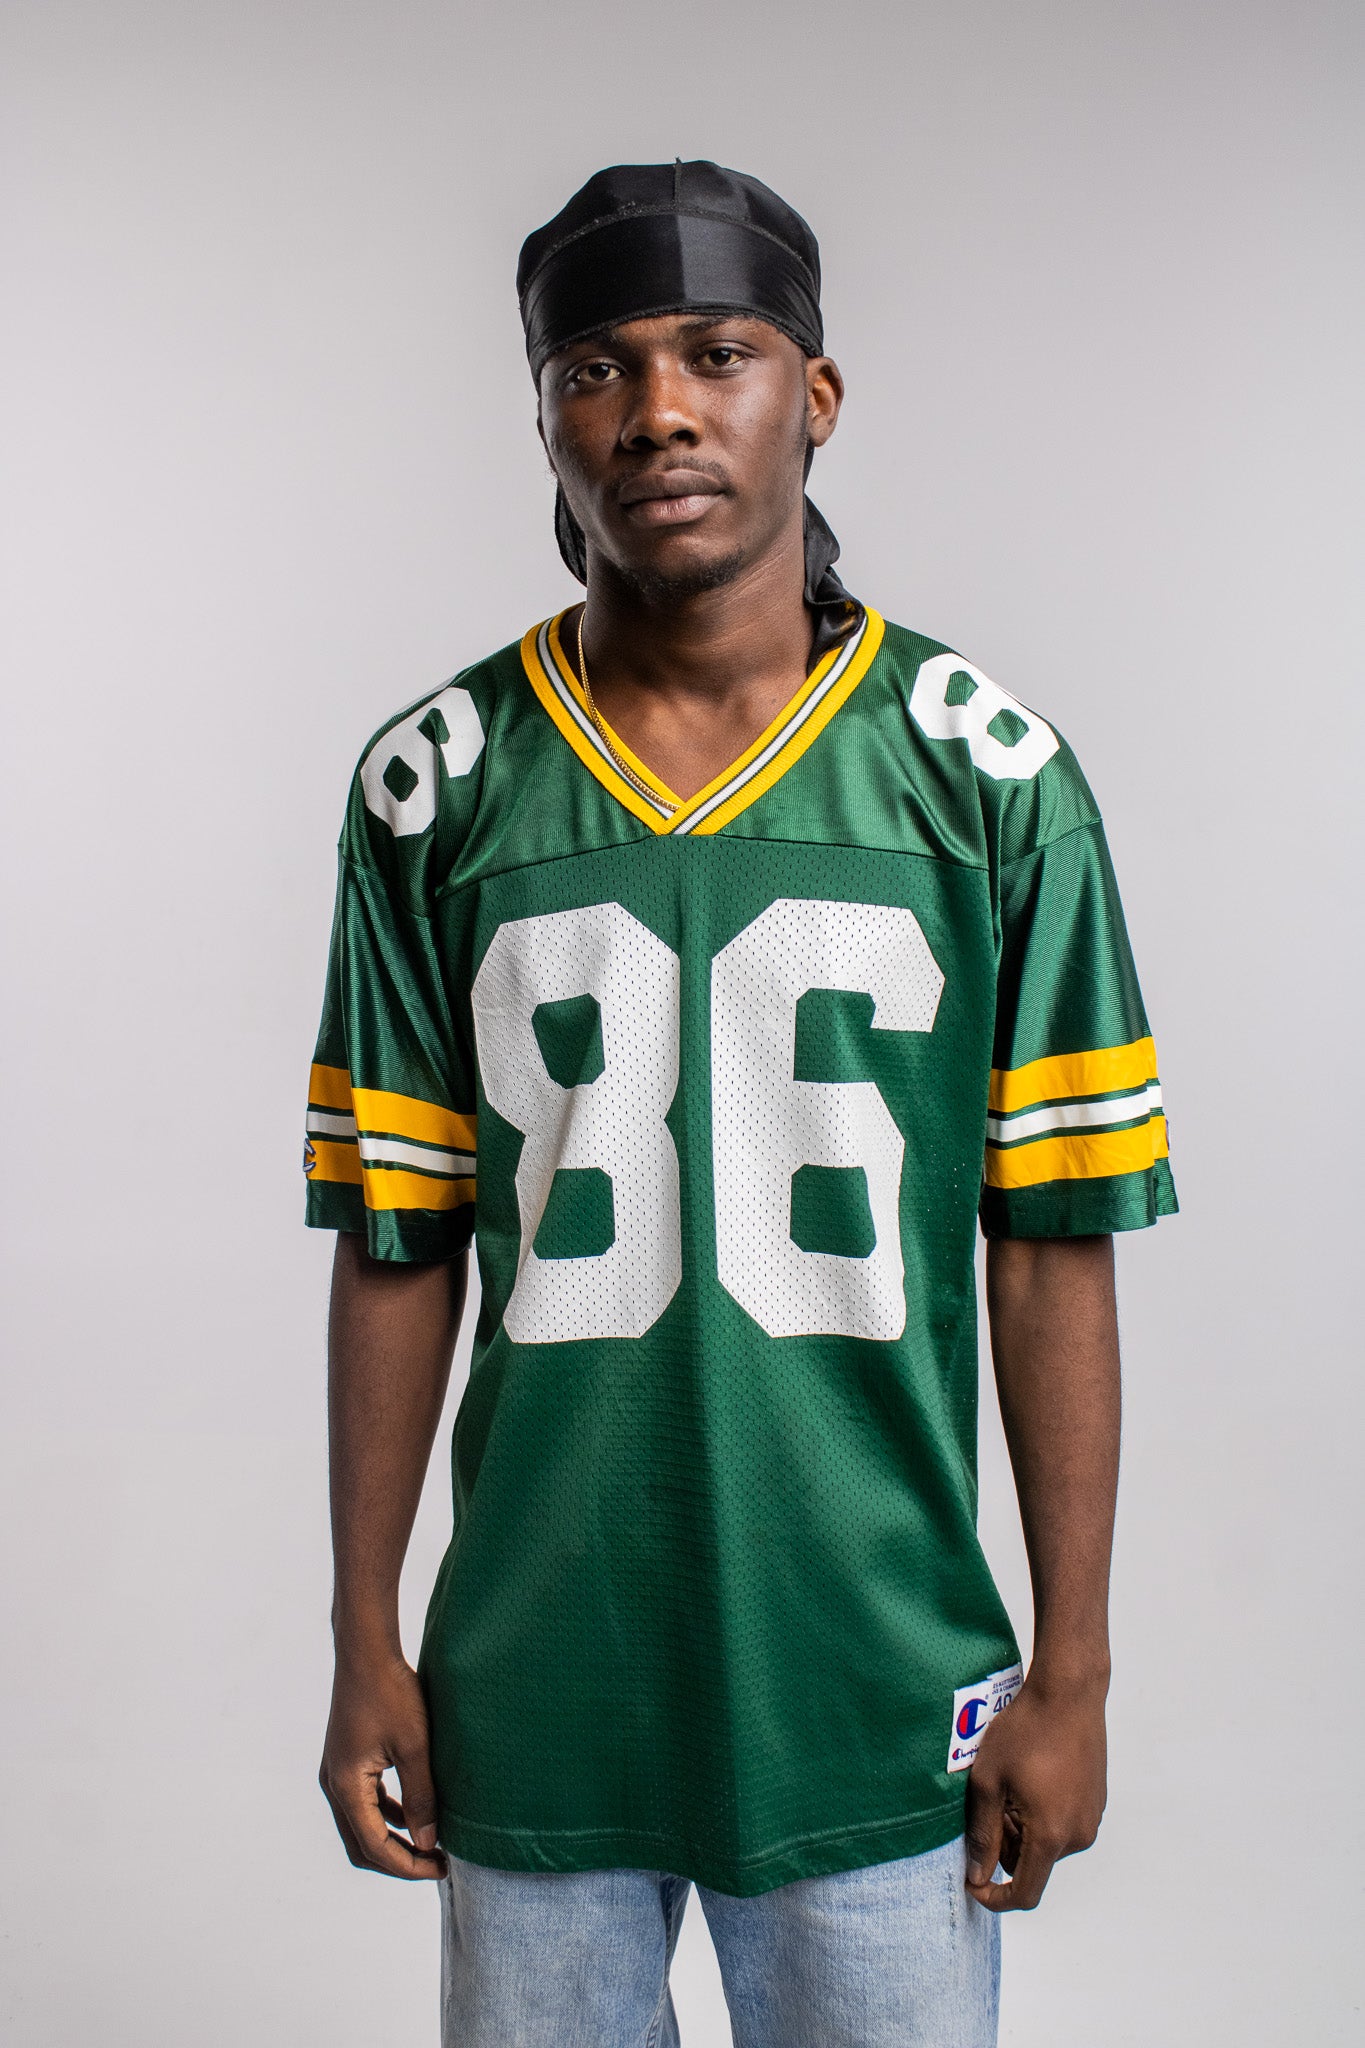 NFL Champion Vintage Green Bay Packers Jersey